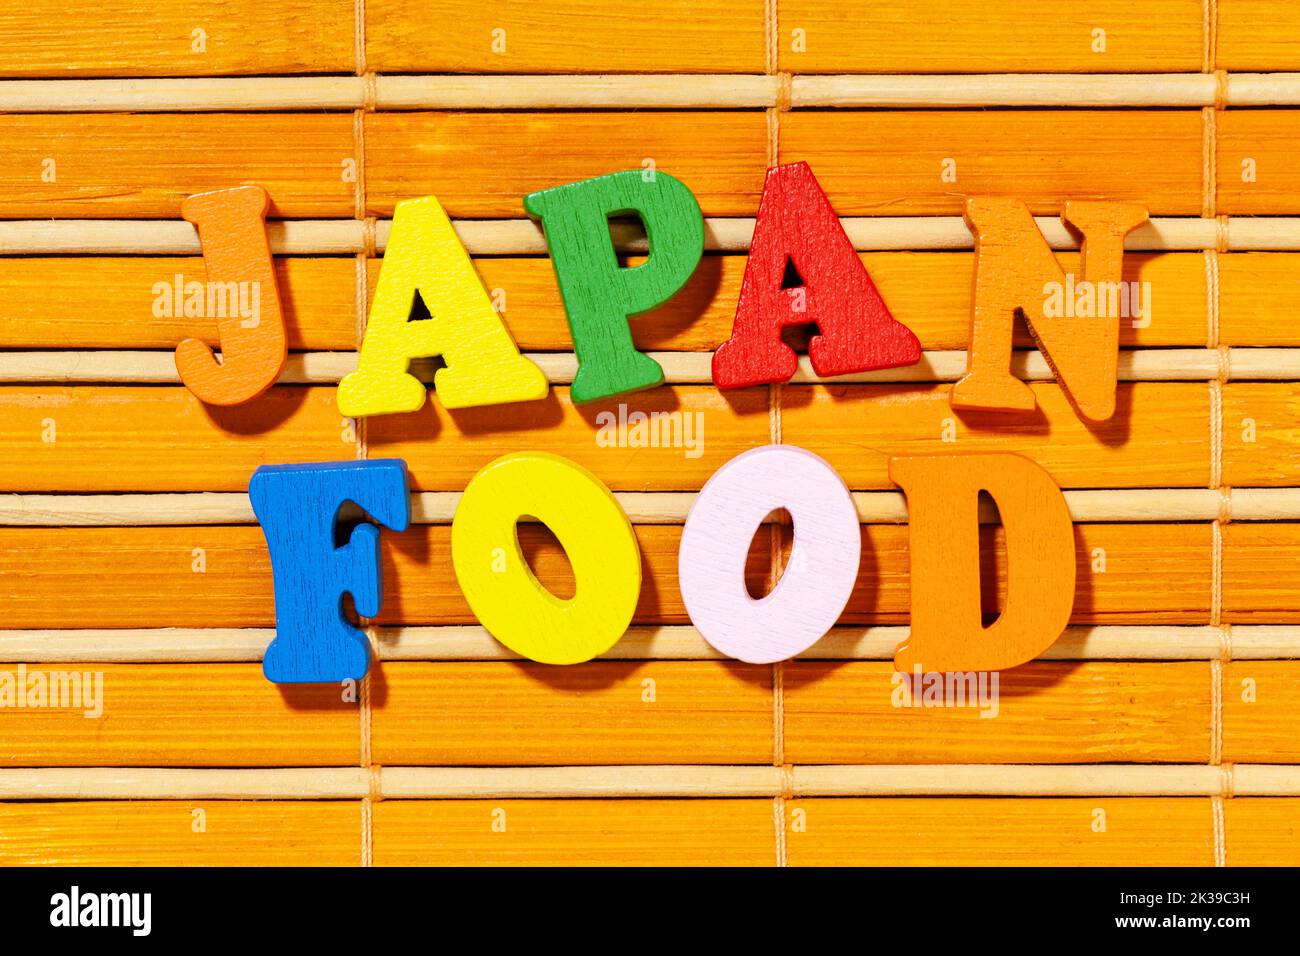 Japan Food - Inscription by colorful letters on bamboo mat Stock Photo